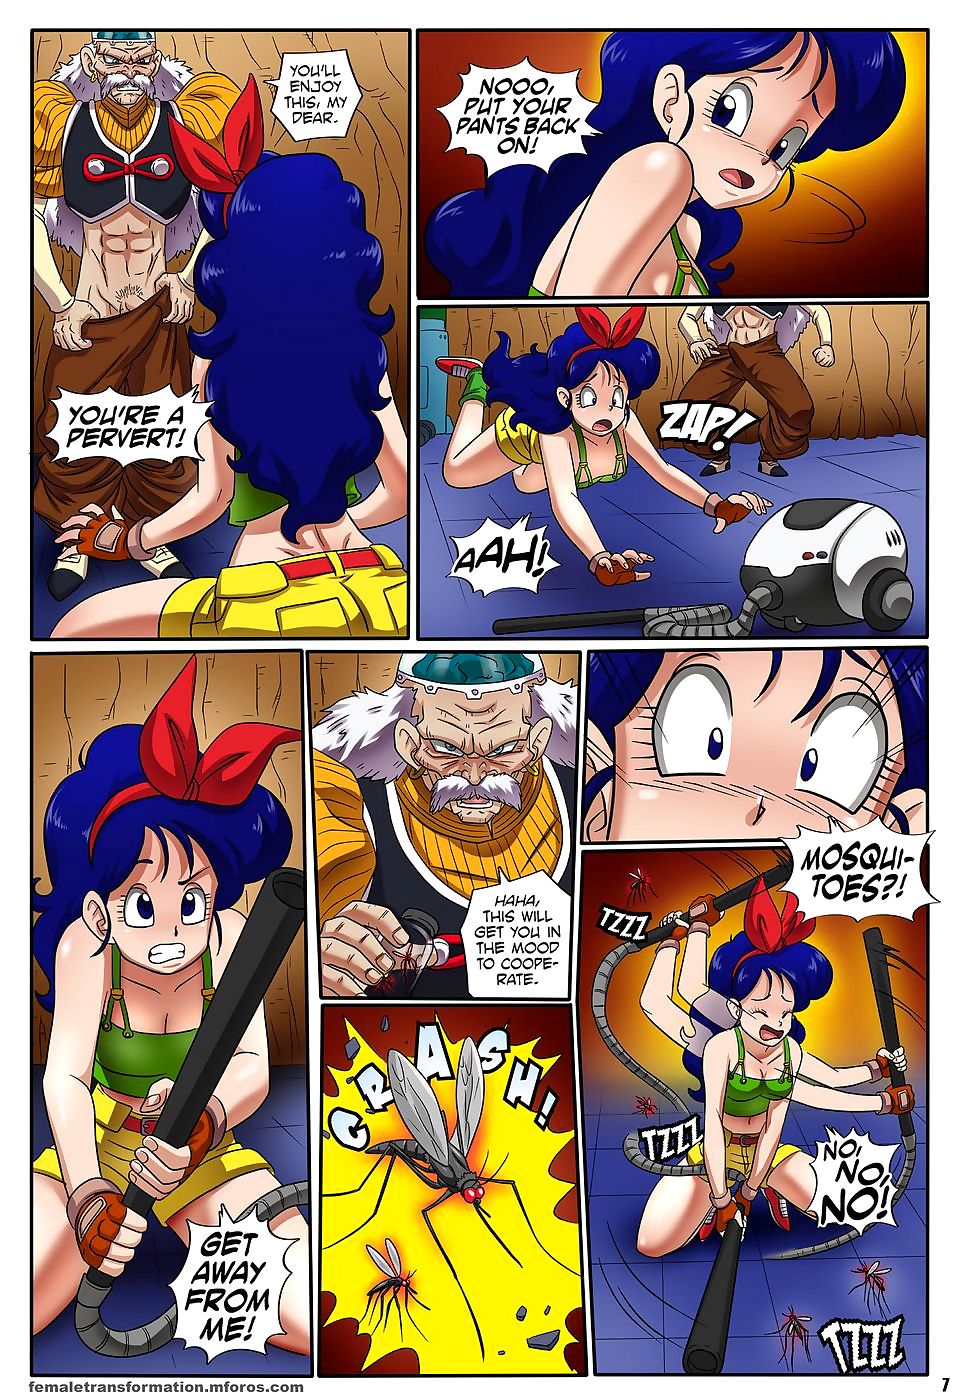 locofuria expansive Sting 3 page 1